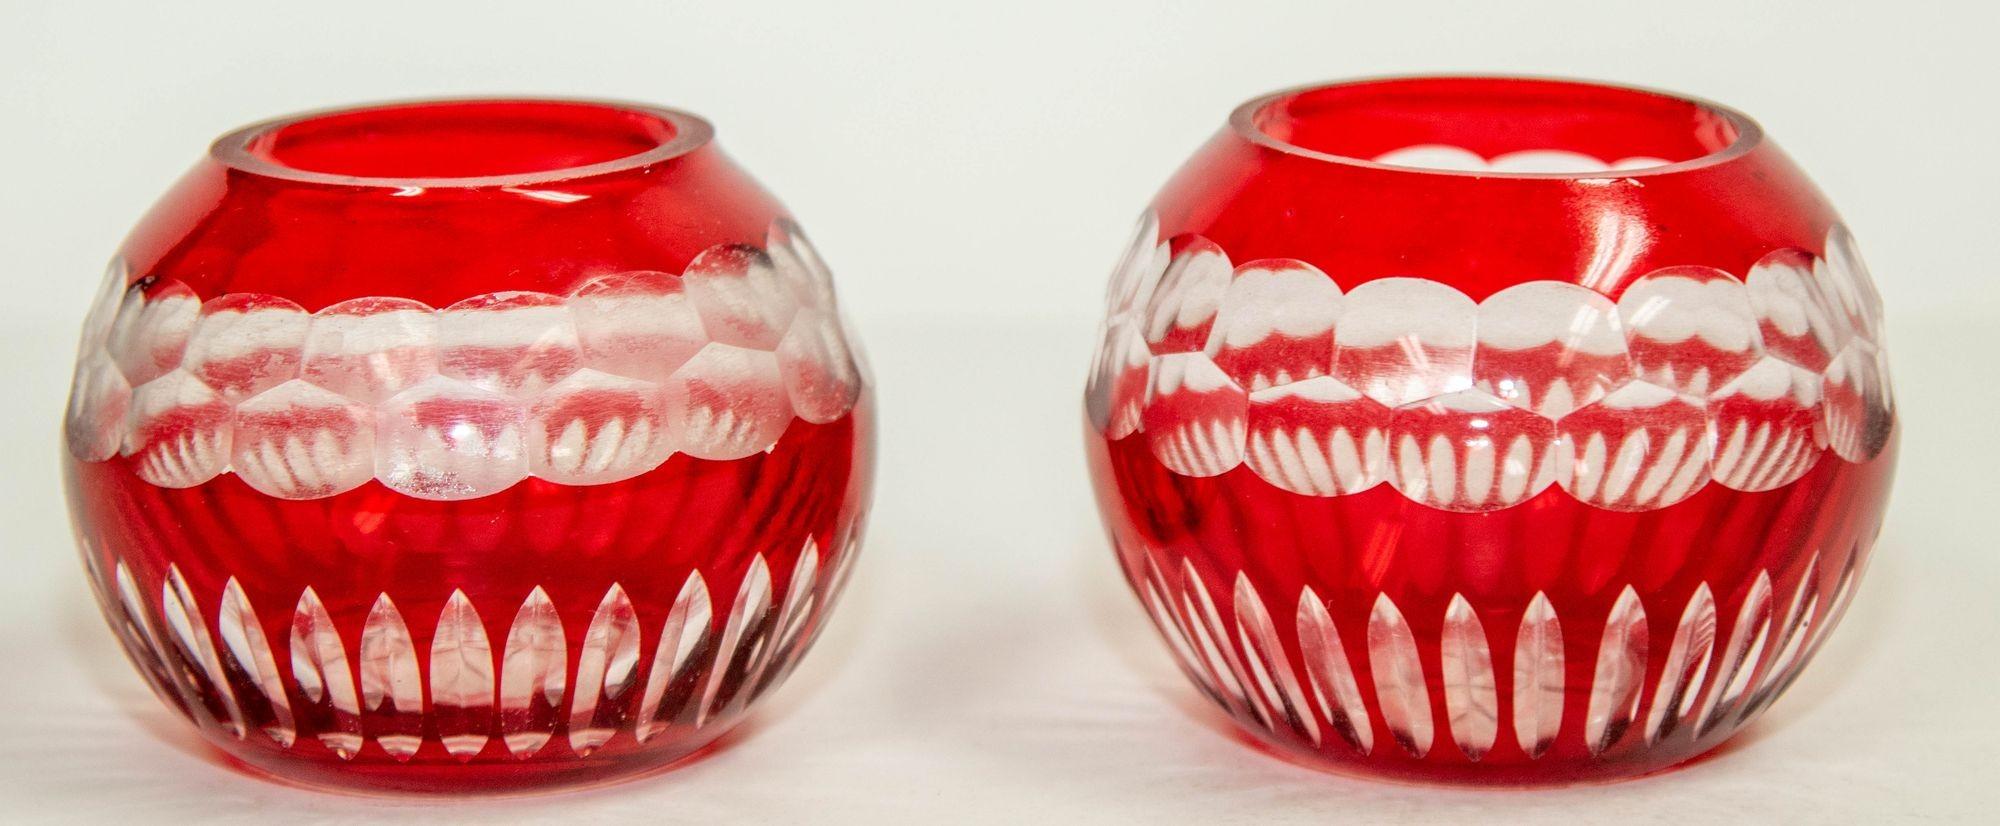 Vintage Bohemian Faberge style cut to clear crystal votive candle holder.
Pair of ruby cut to clear crystal tea light holders, ruby cut glass votives.
Set of two Bohemian votive ruby red cut crystal votive holder.
Great to use with votive candle